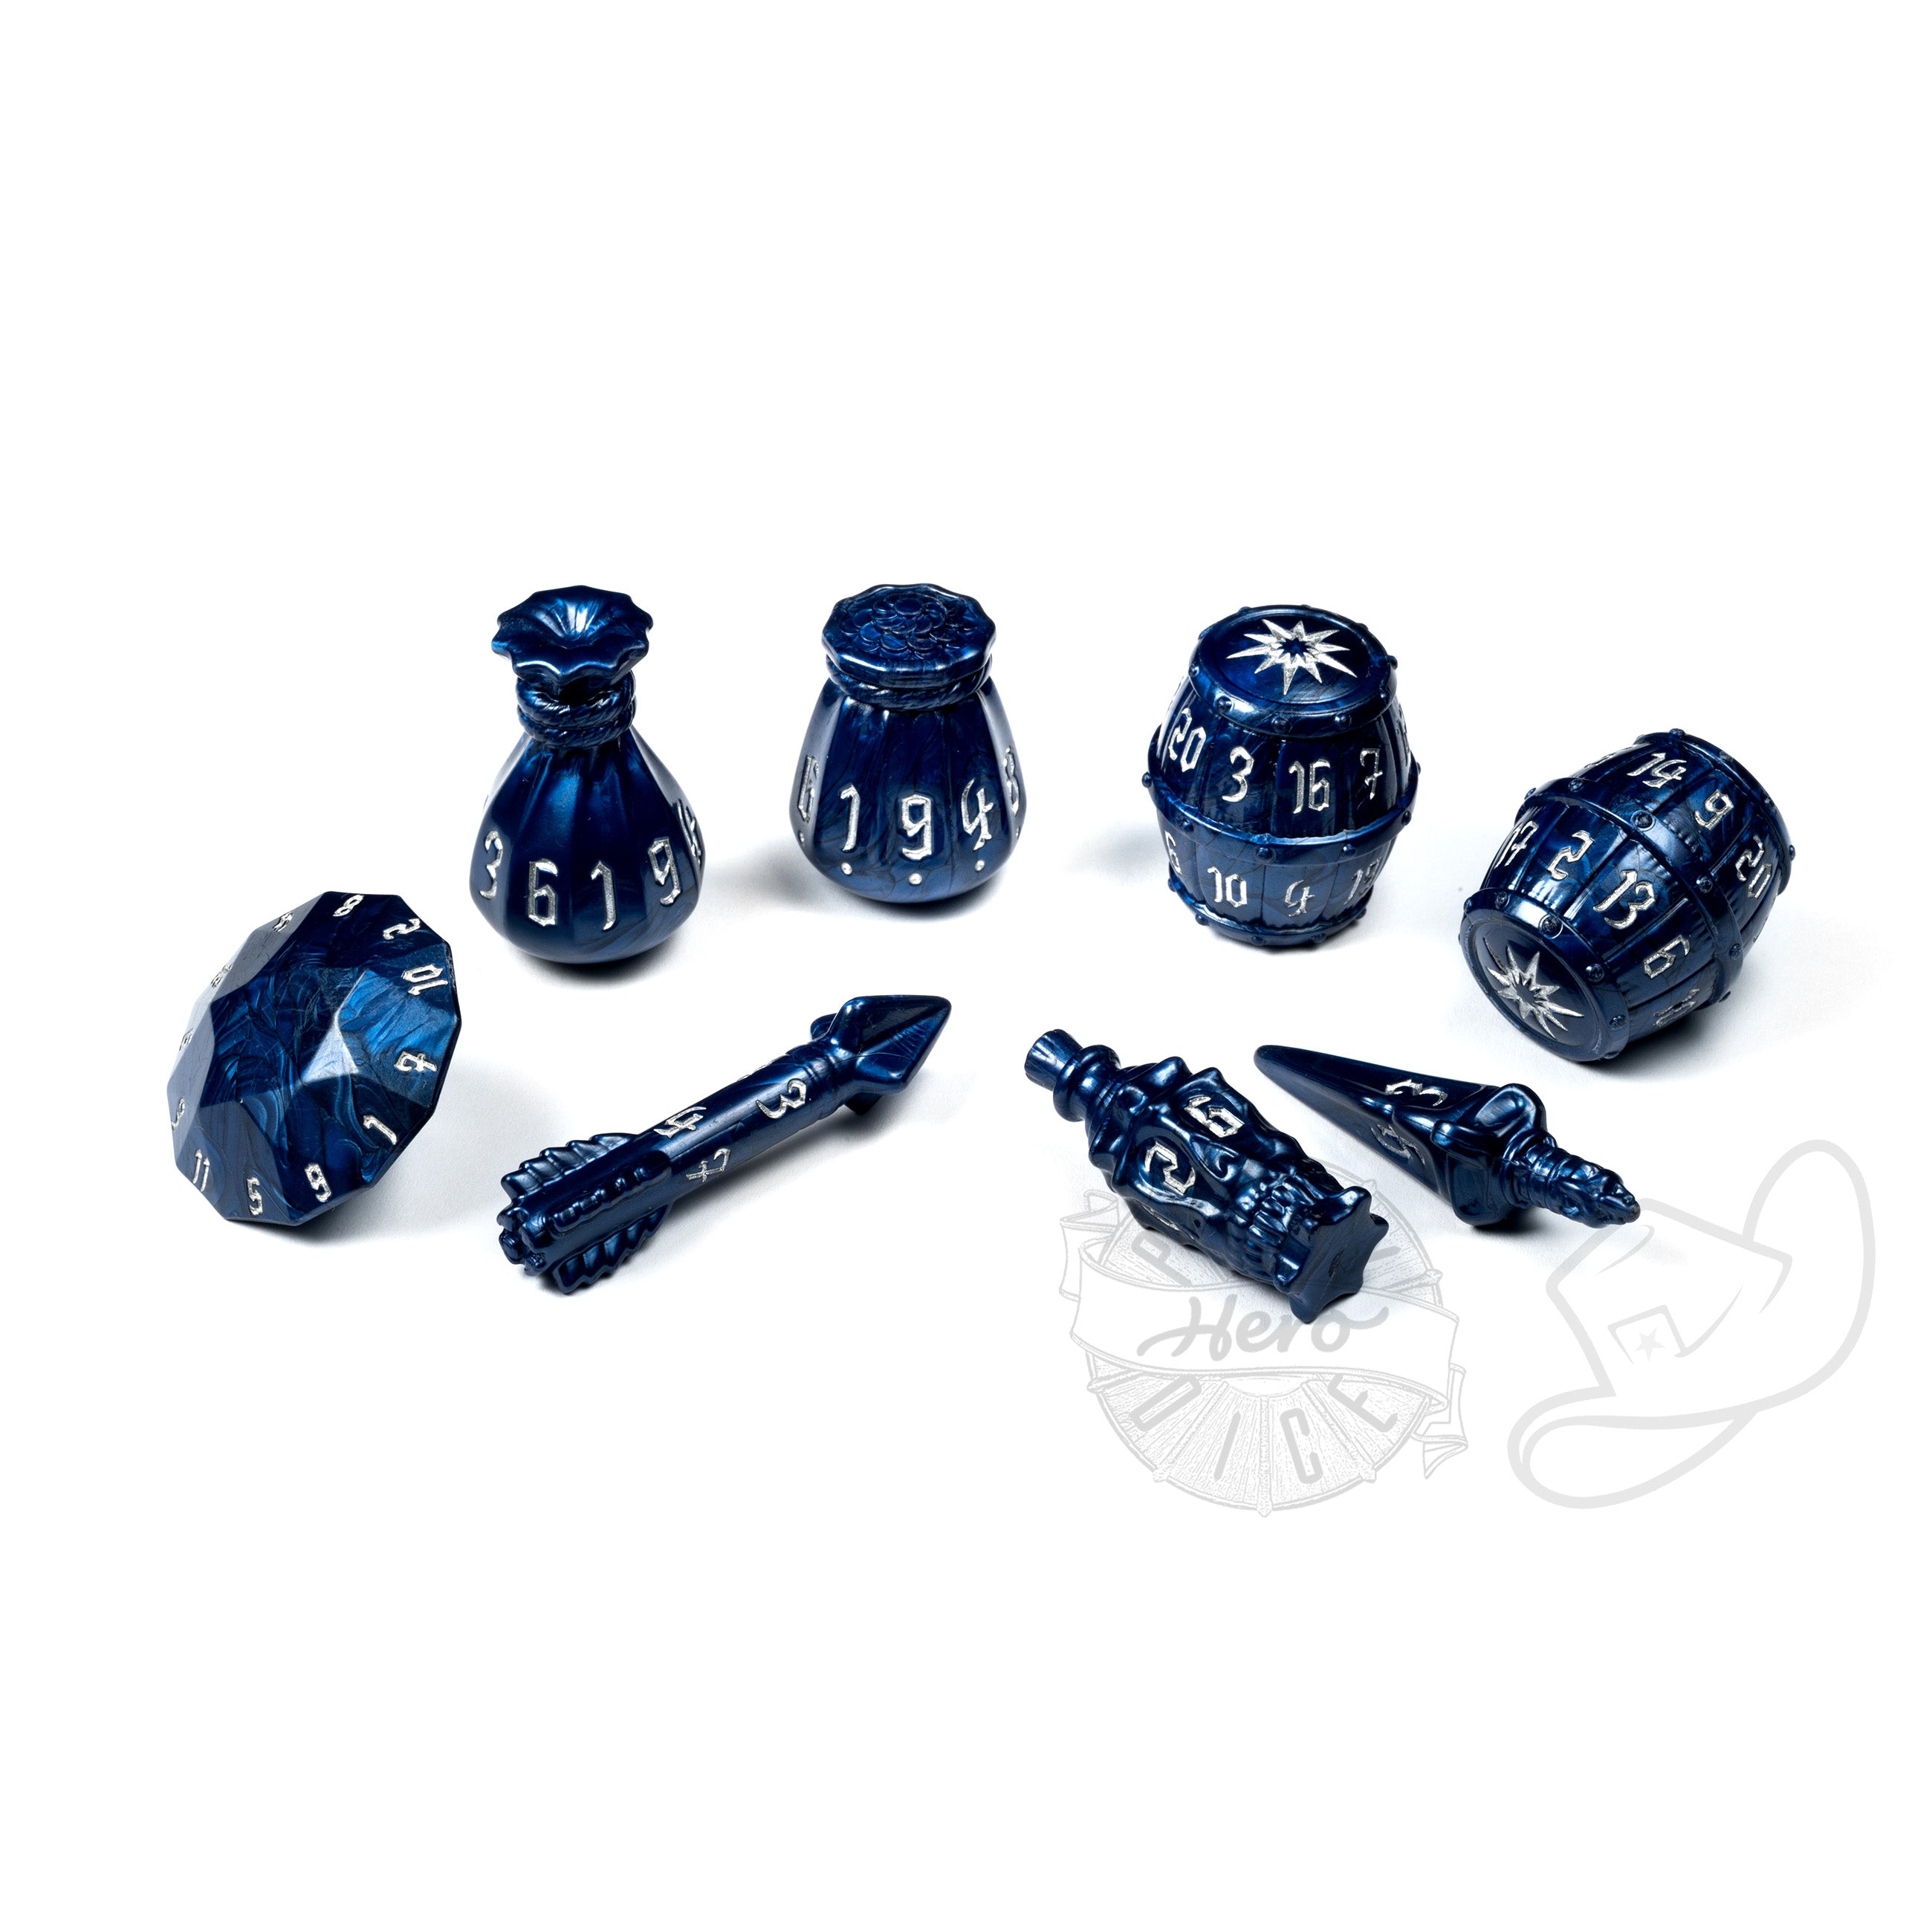 PolyHero Rogue 8 Dice roleplaying Set midnight blue